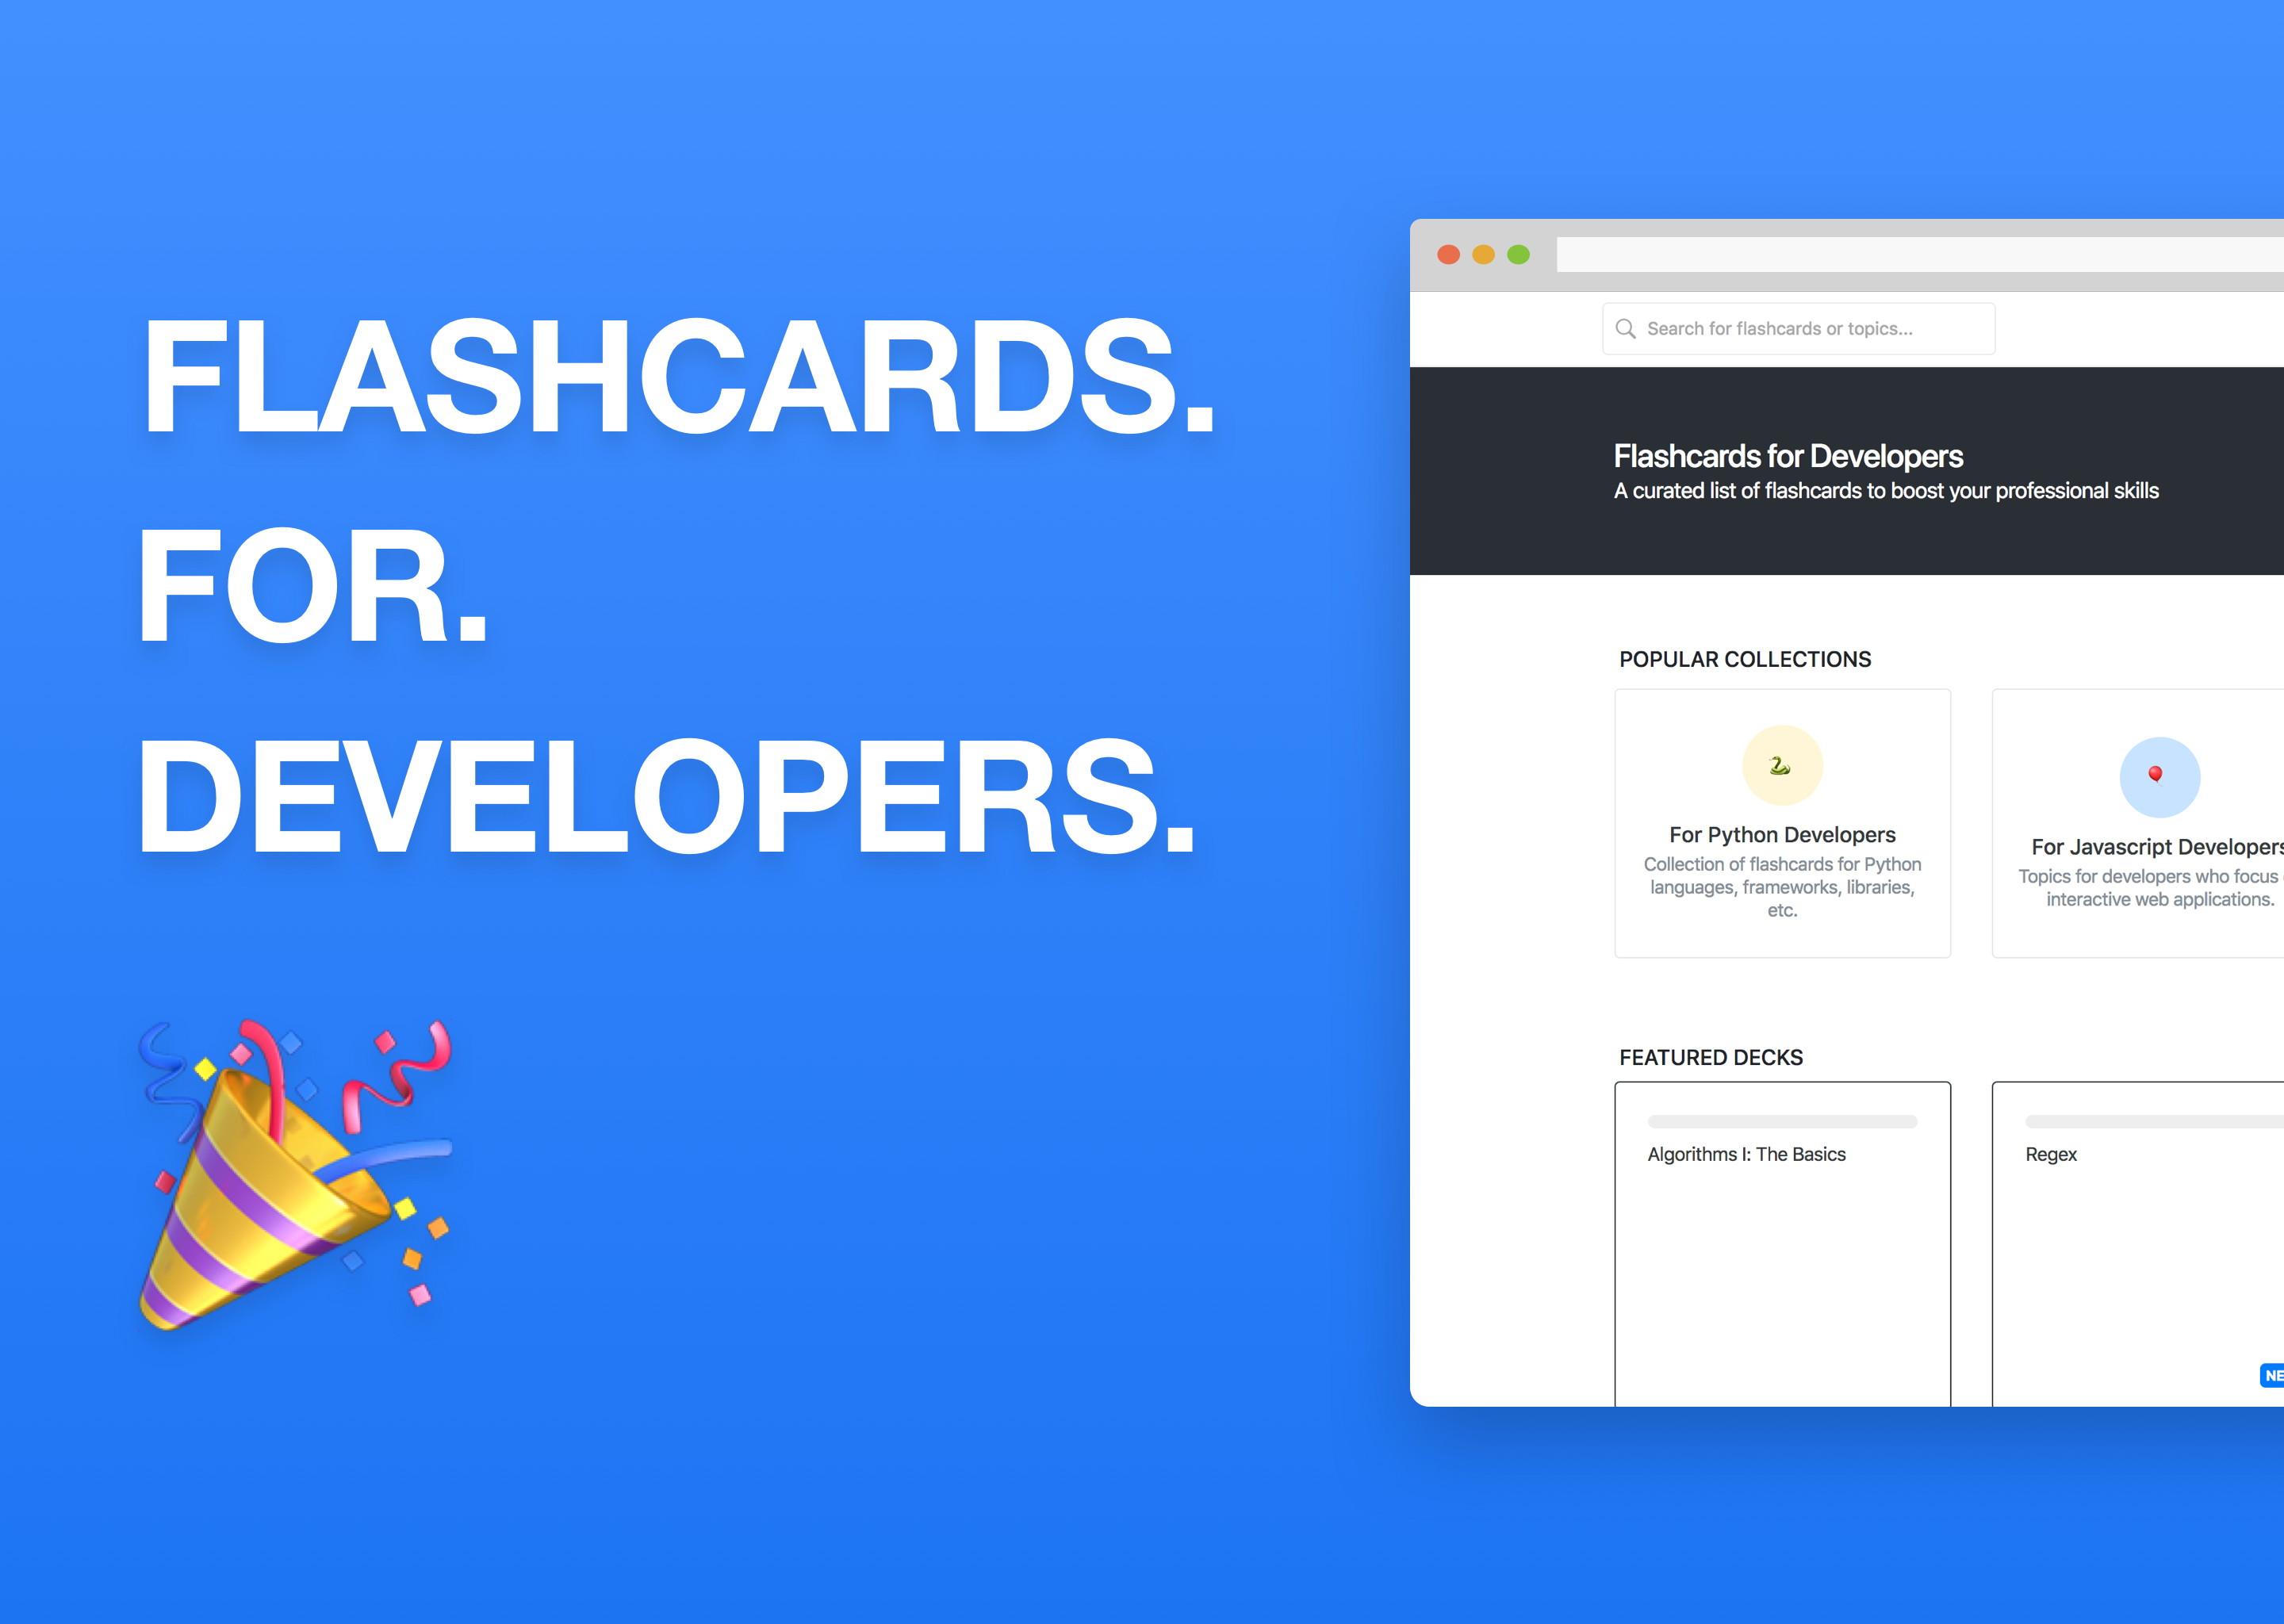 How To Learn to Code With Flashcards for Developers